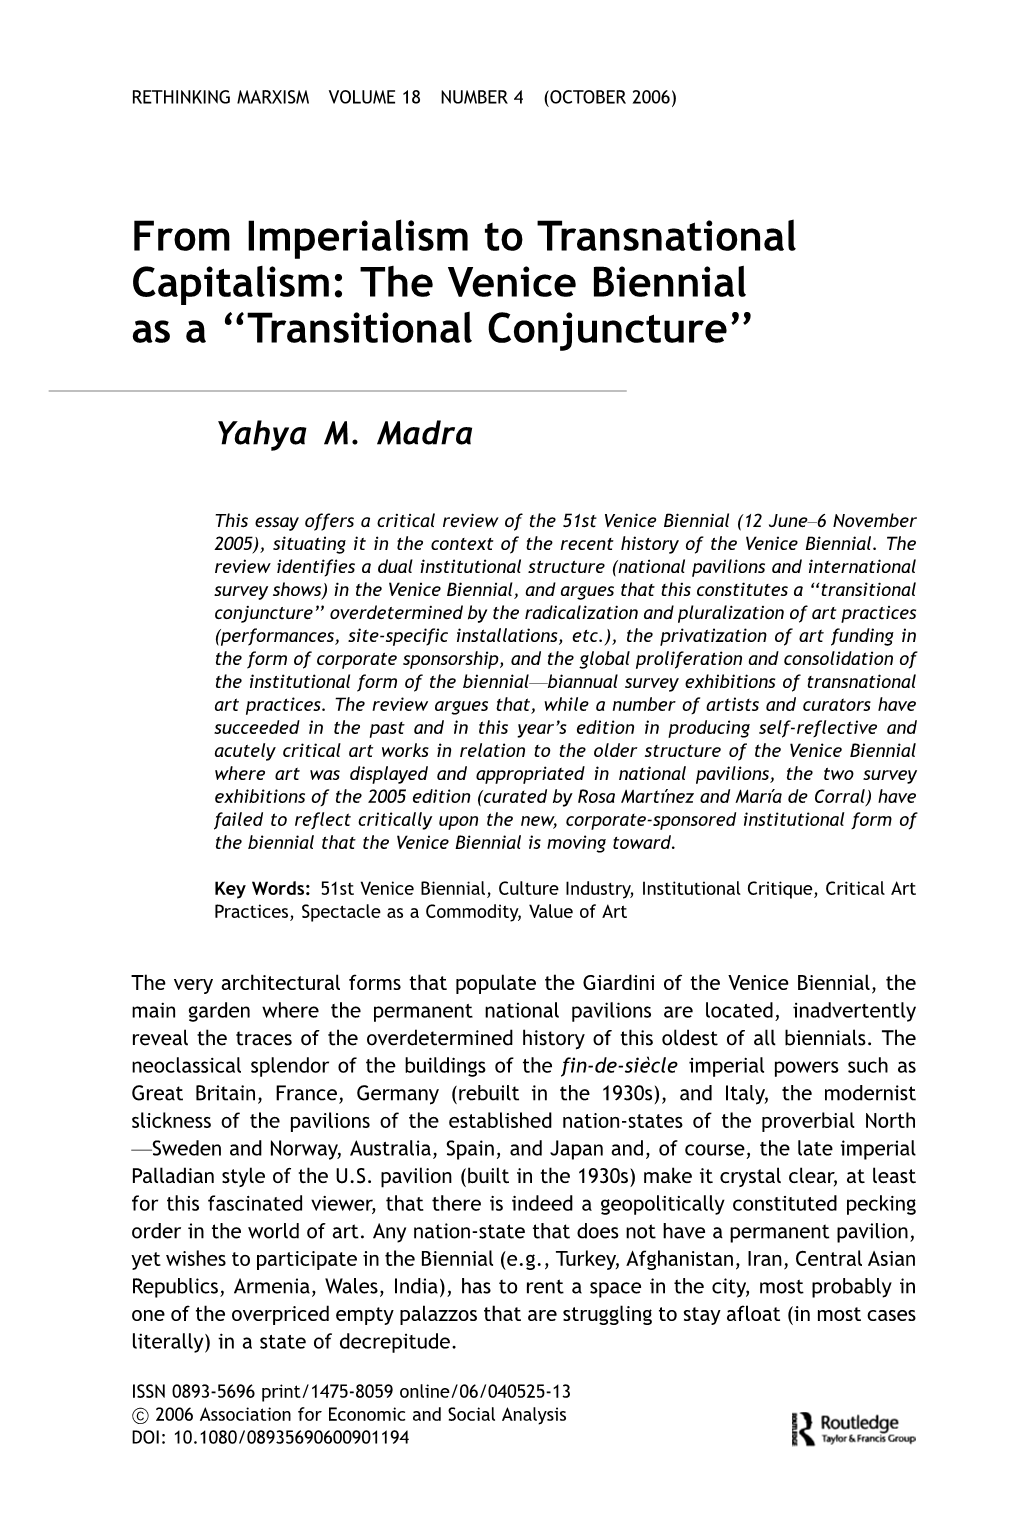 From Imperialism to Transnational Capitalism: the Venice Biennial As a ‘‘Transitional Conjuncture’’